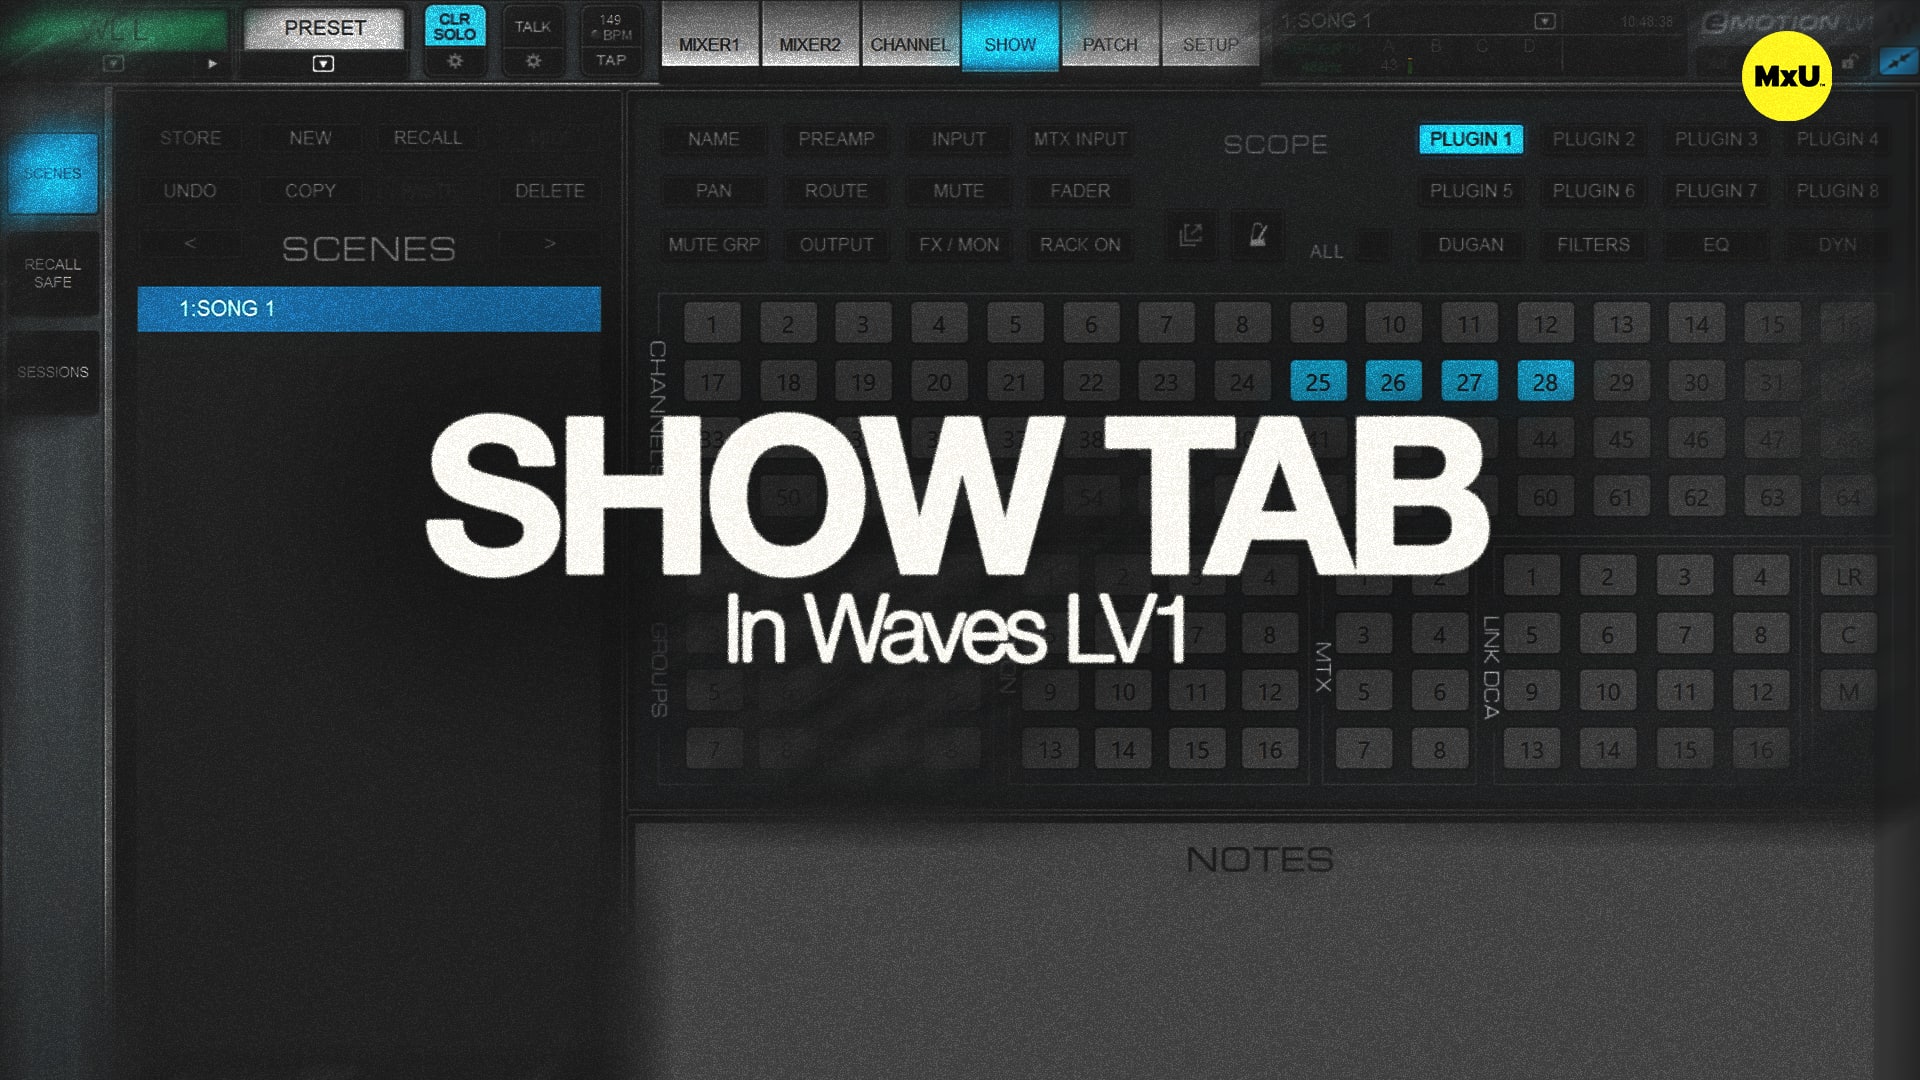 Show Tab in Waves LV1